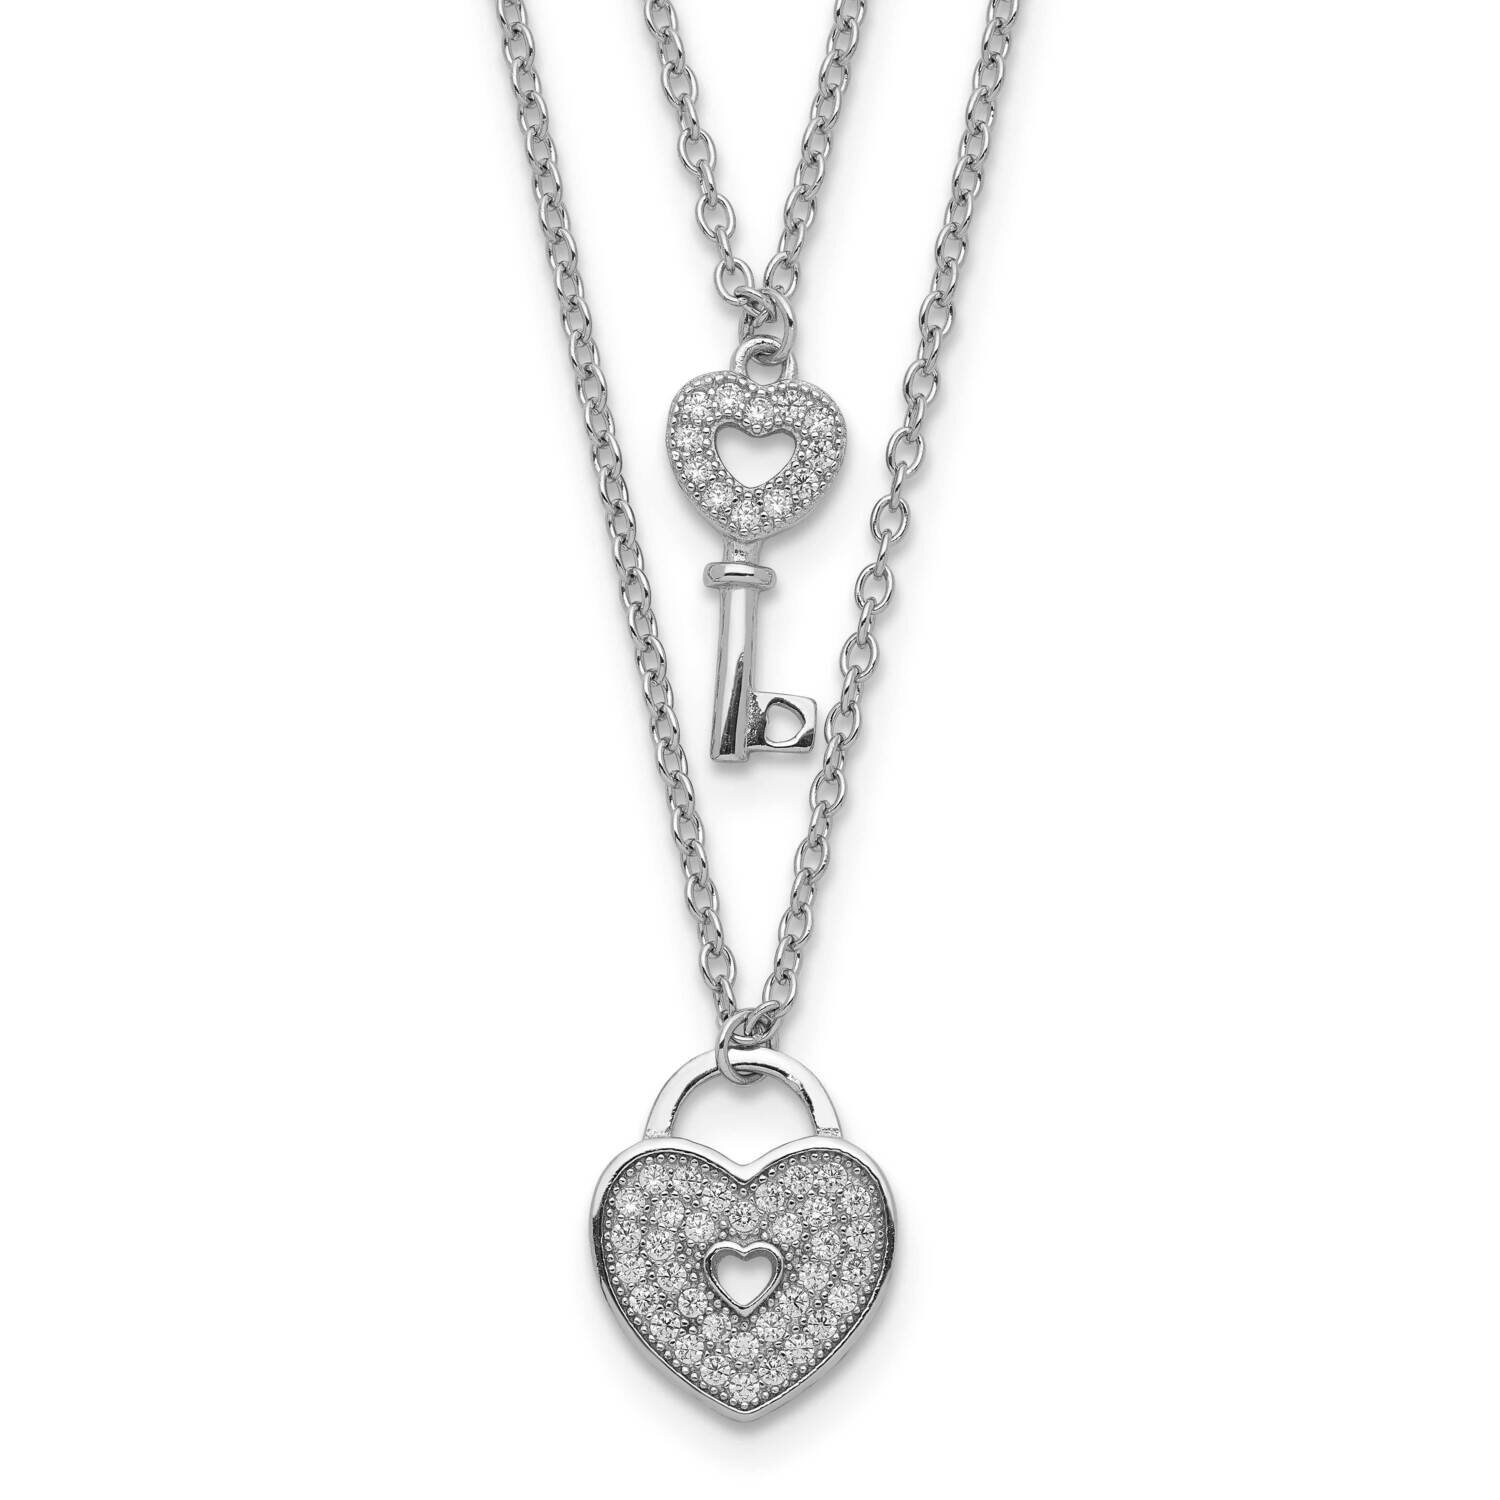 CZ Diamond Heart Lock Key with 2 Inch Extender Necklace 18 Inch Sterling Silver Rhodium-Plated QG5156-16